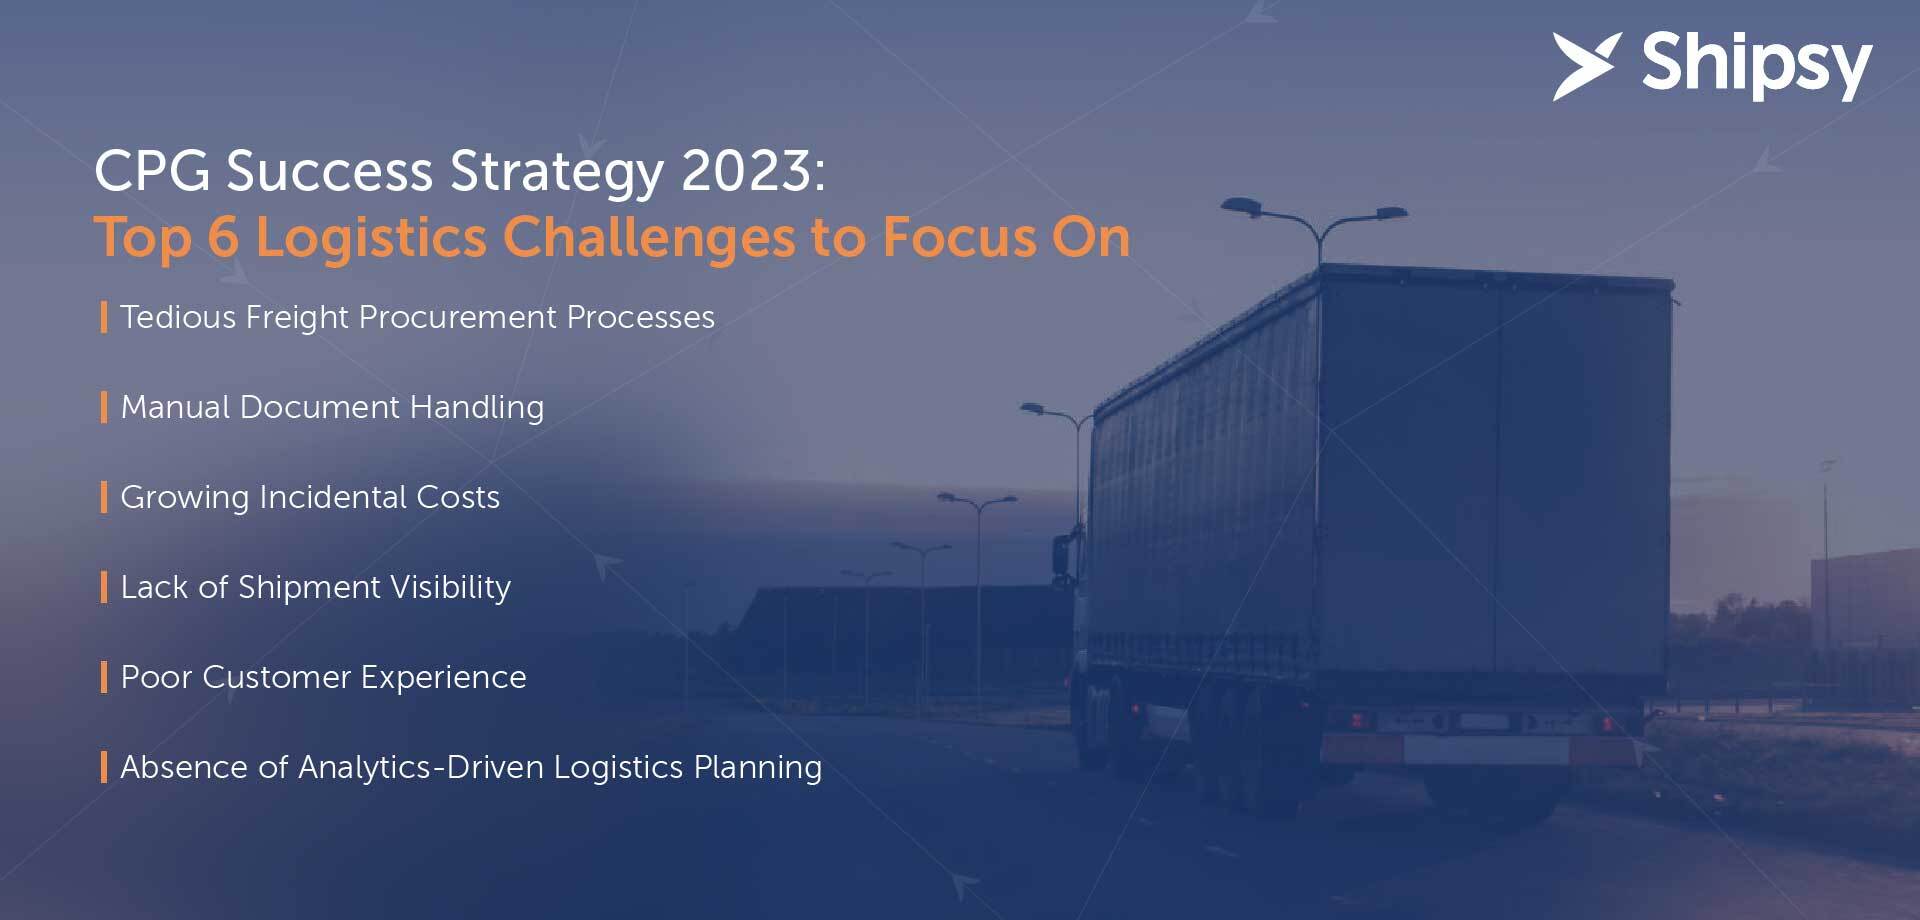 logistics challenges for CPG companies